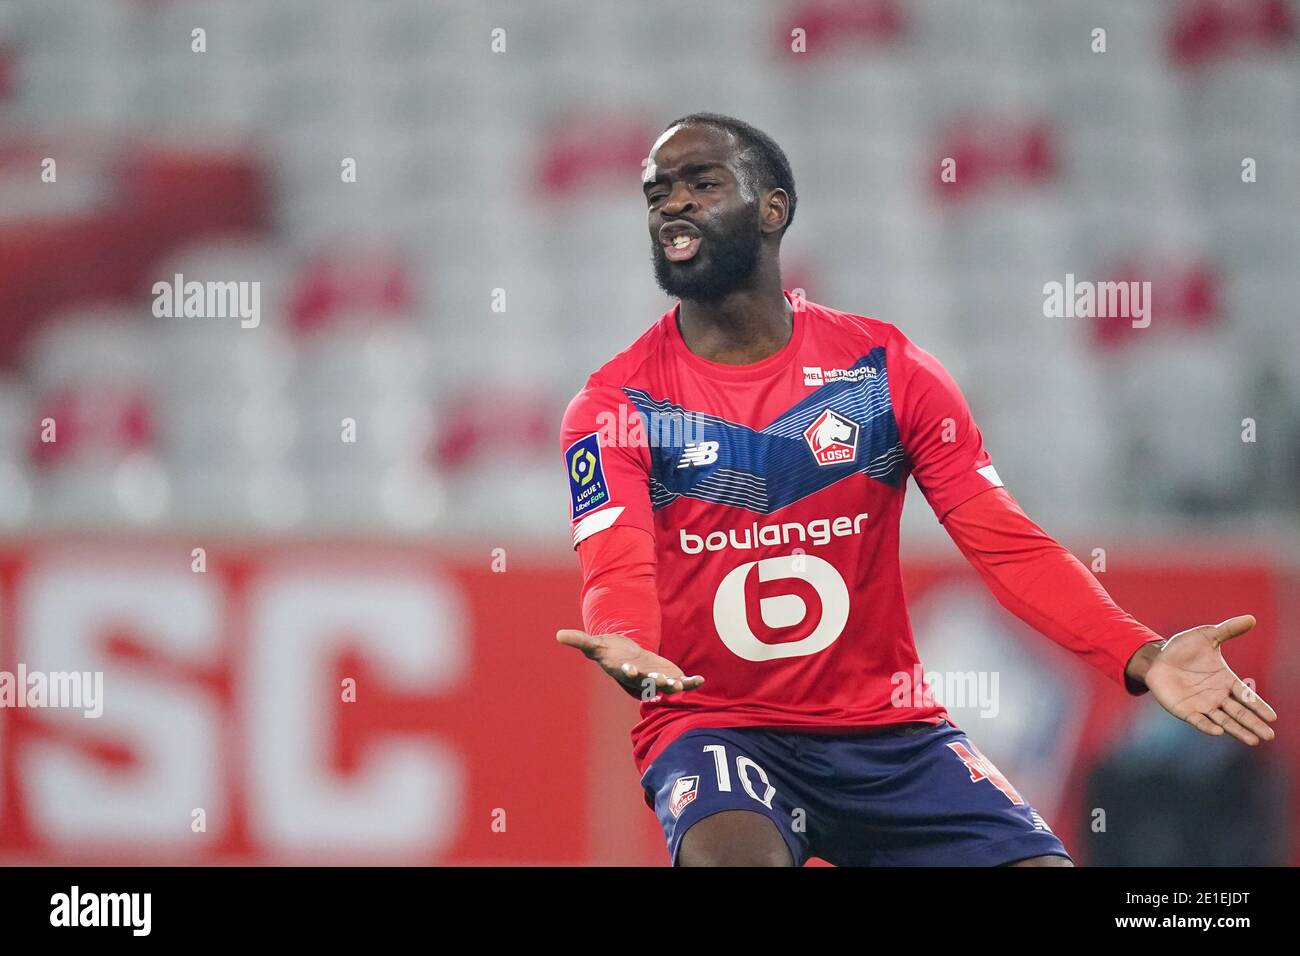 LILLE, FRANCE - JANUARY 6: Jonathan Ikone of Lille OSC during the Ligue 1 match between Lille OSC and Angers SCO at Stade Pierre Mauroy on January 6, 2021 in Lille, France (Photo by Jeroen Meuwsen/BSR Agency/Alamy Live News)*** Local Caption *** Jonathan Ikone Stock Photo